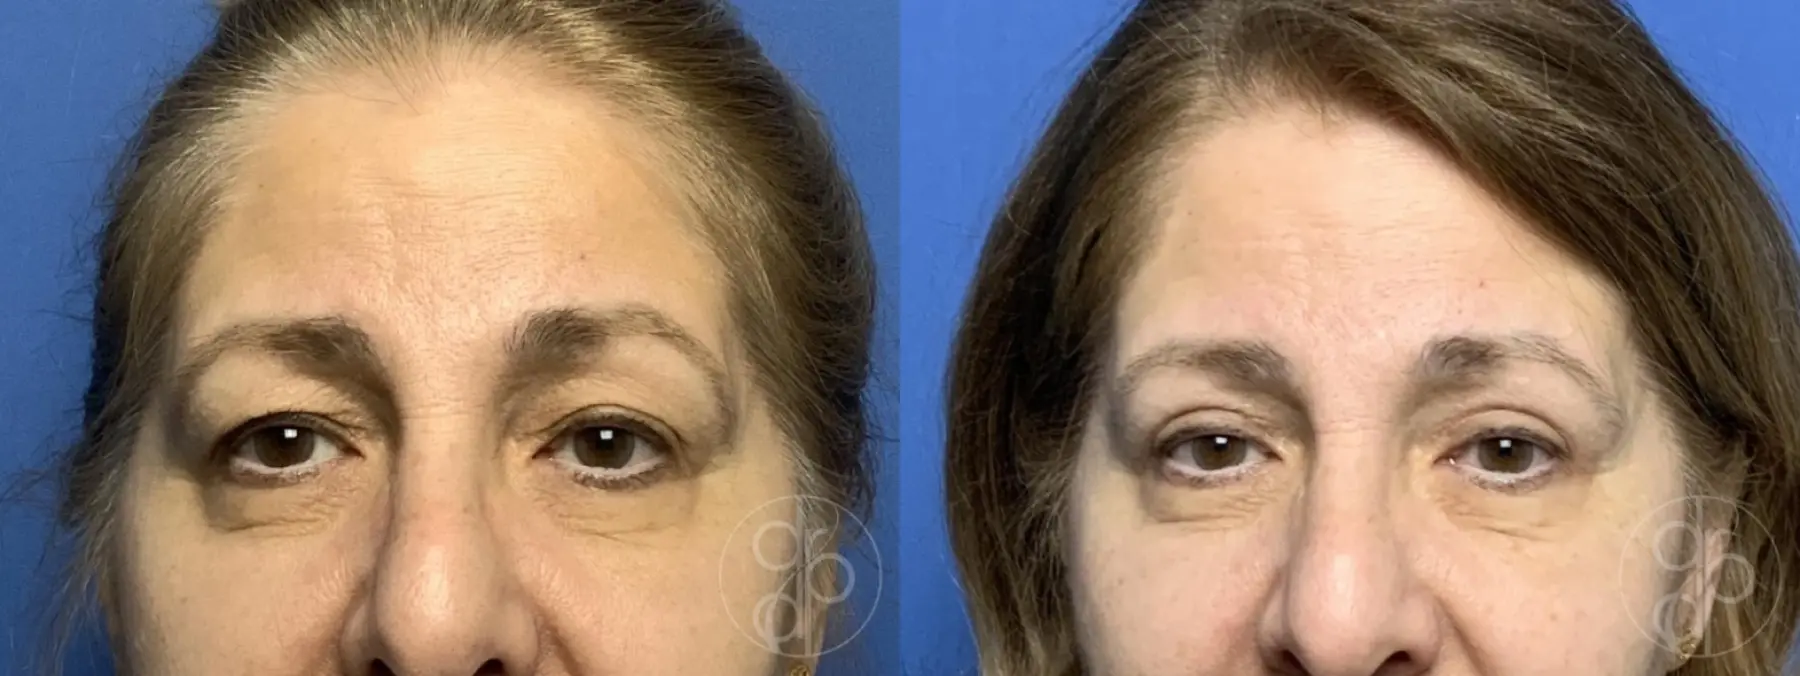 patient 13764 blepharoplasty before and after result - Before and After 1